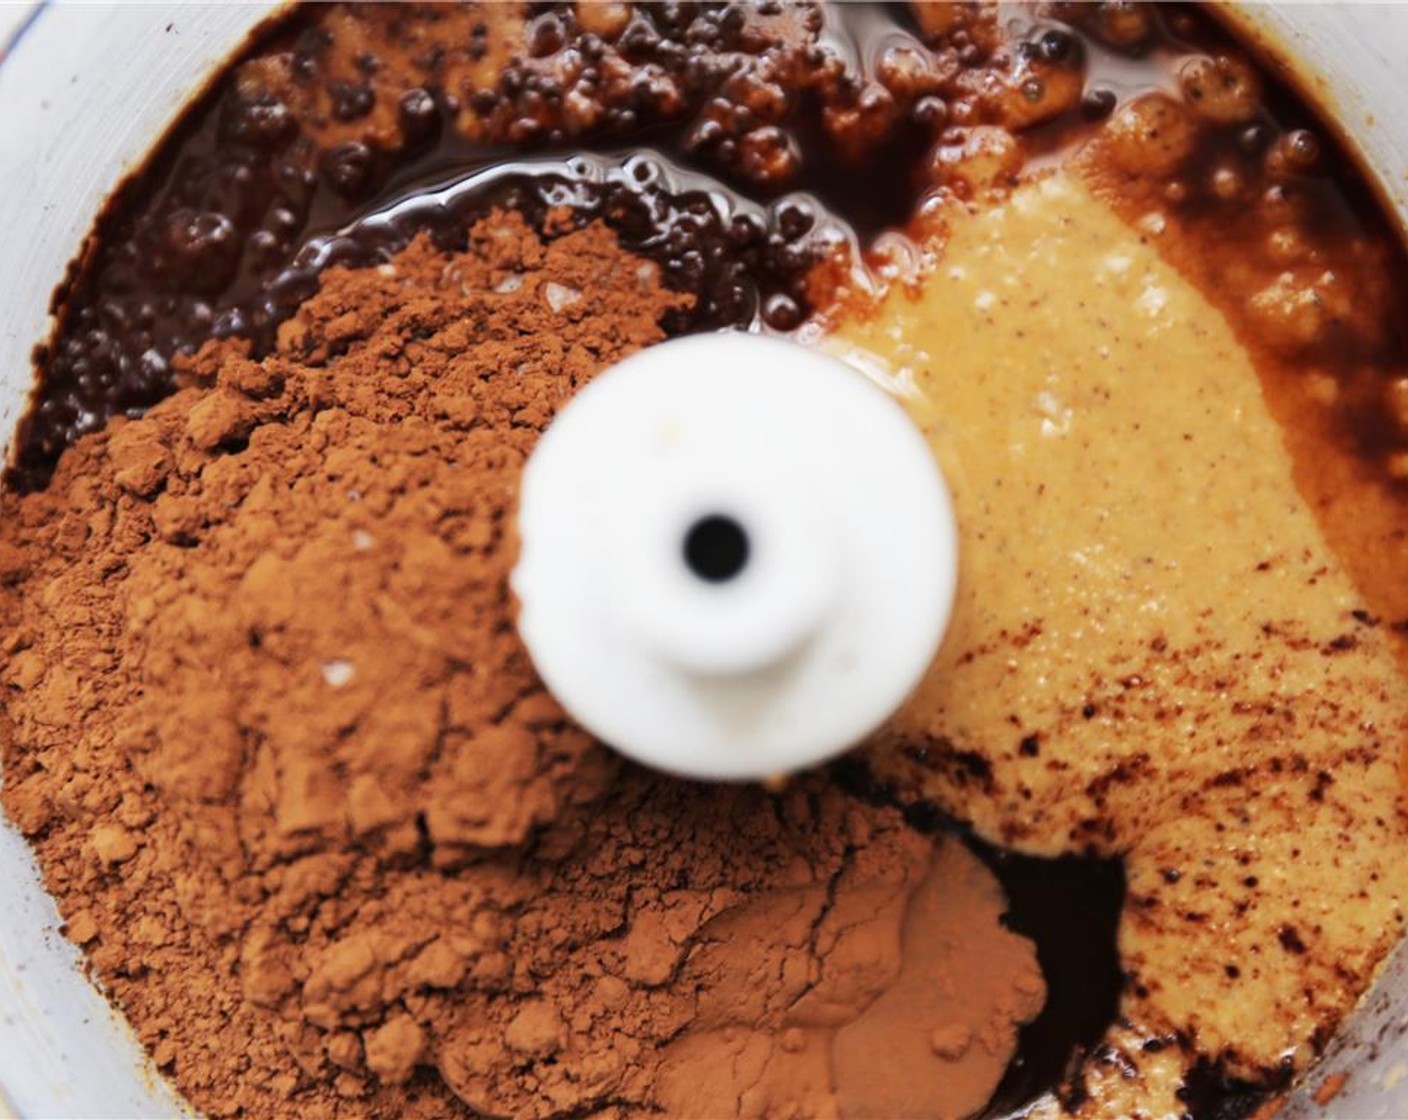 step 6 Once the hazelnut butter is smooth and creamy, add the  Unsweetened Cocoa Powder (1/4 cup), Pure Vanilla Extract (1 tsp), Honey (2 Tbsp) and Sea Salt (1/2 tsp) and continue blending until smooth and creamy.